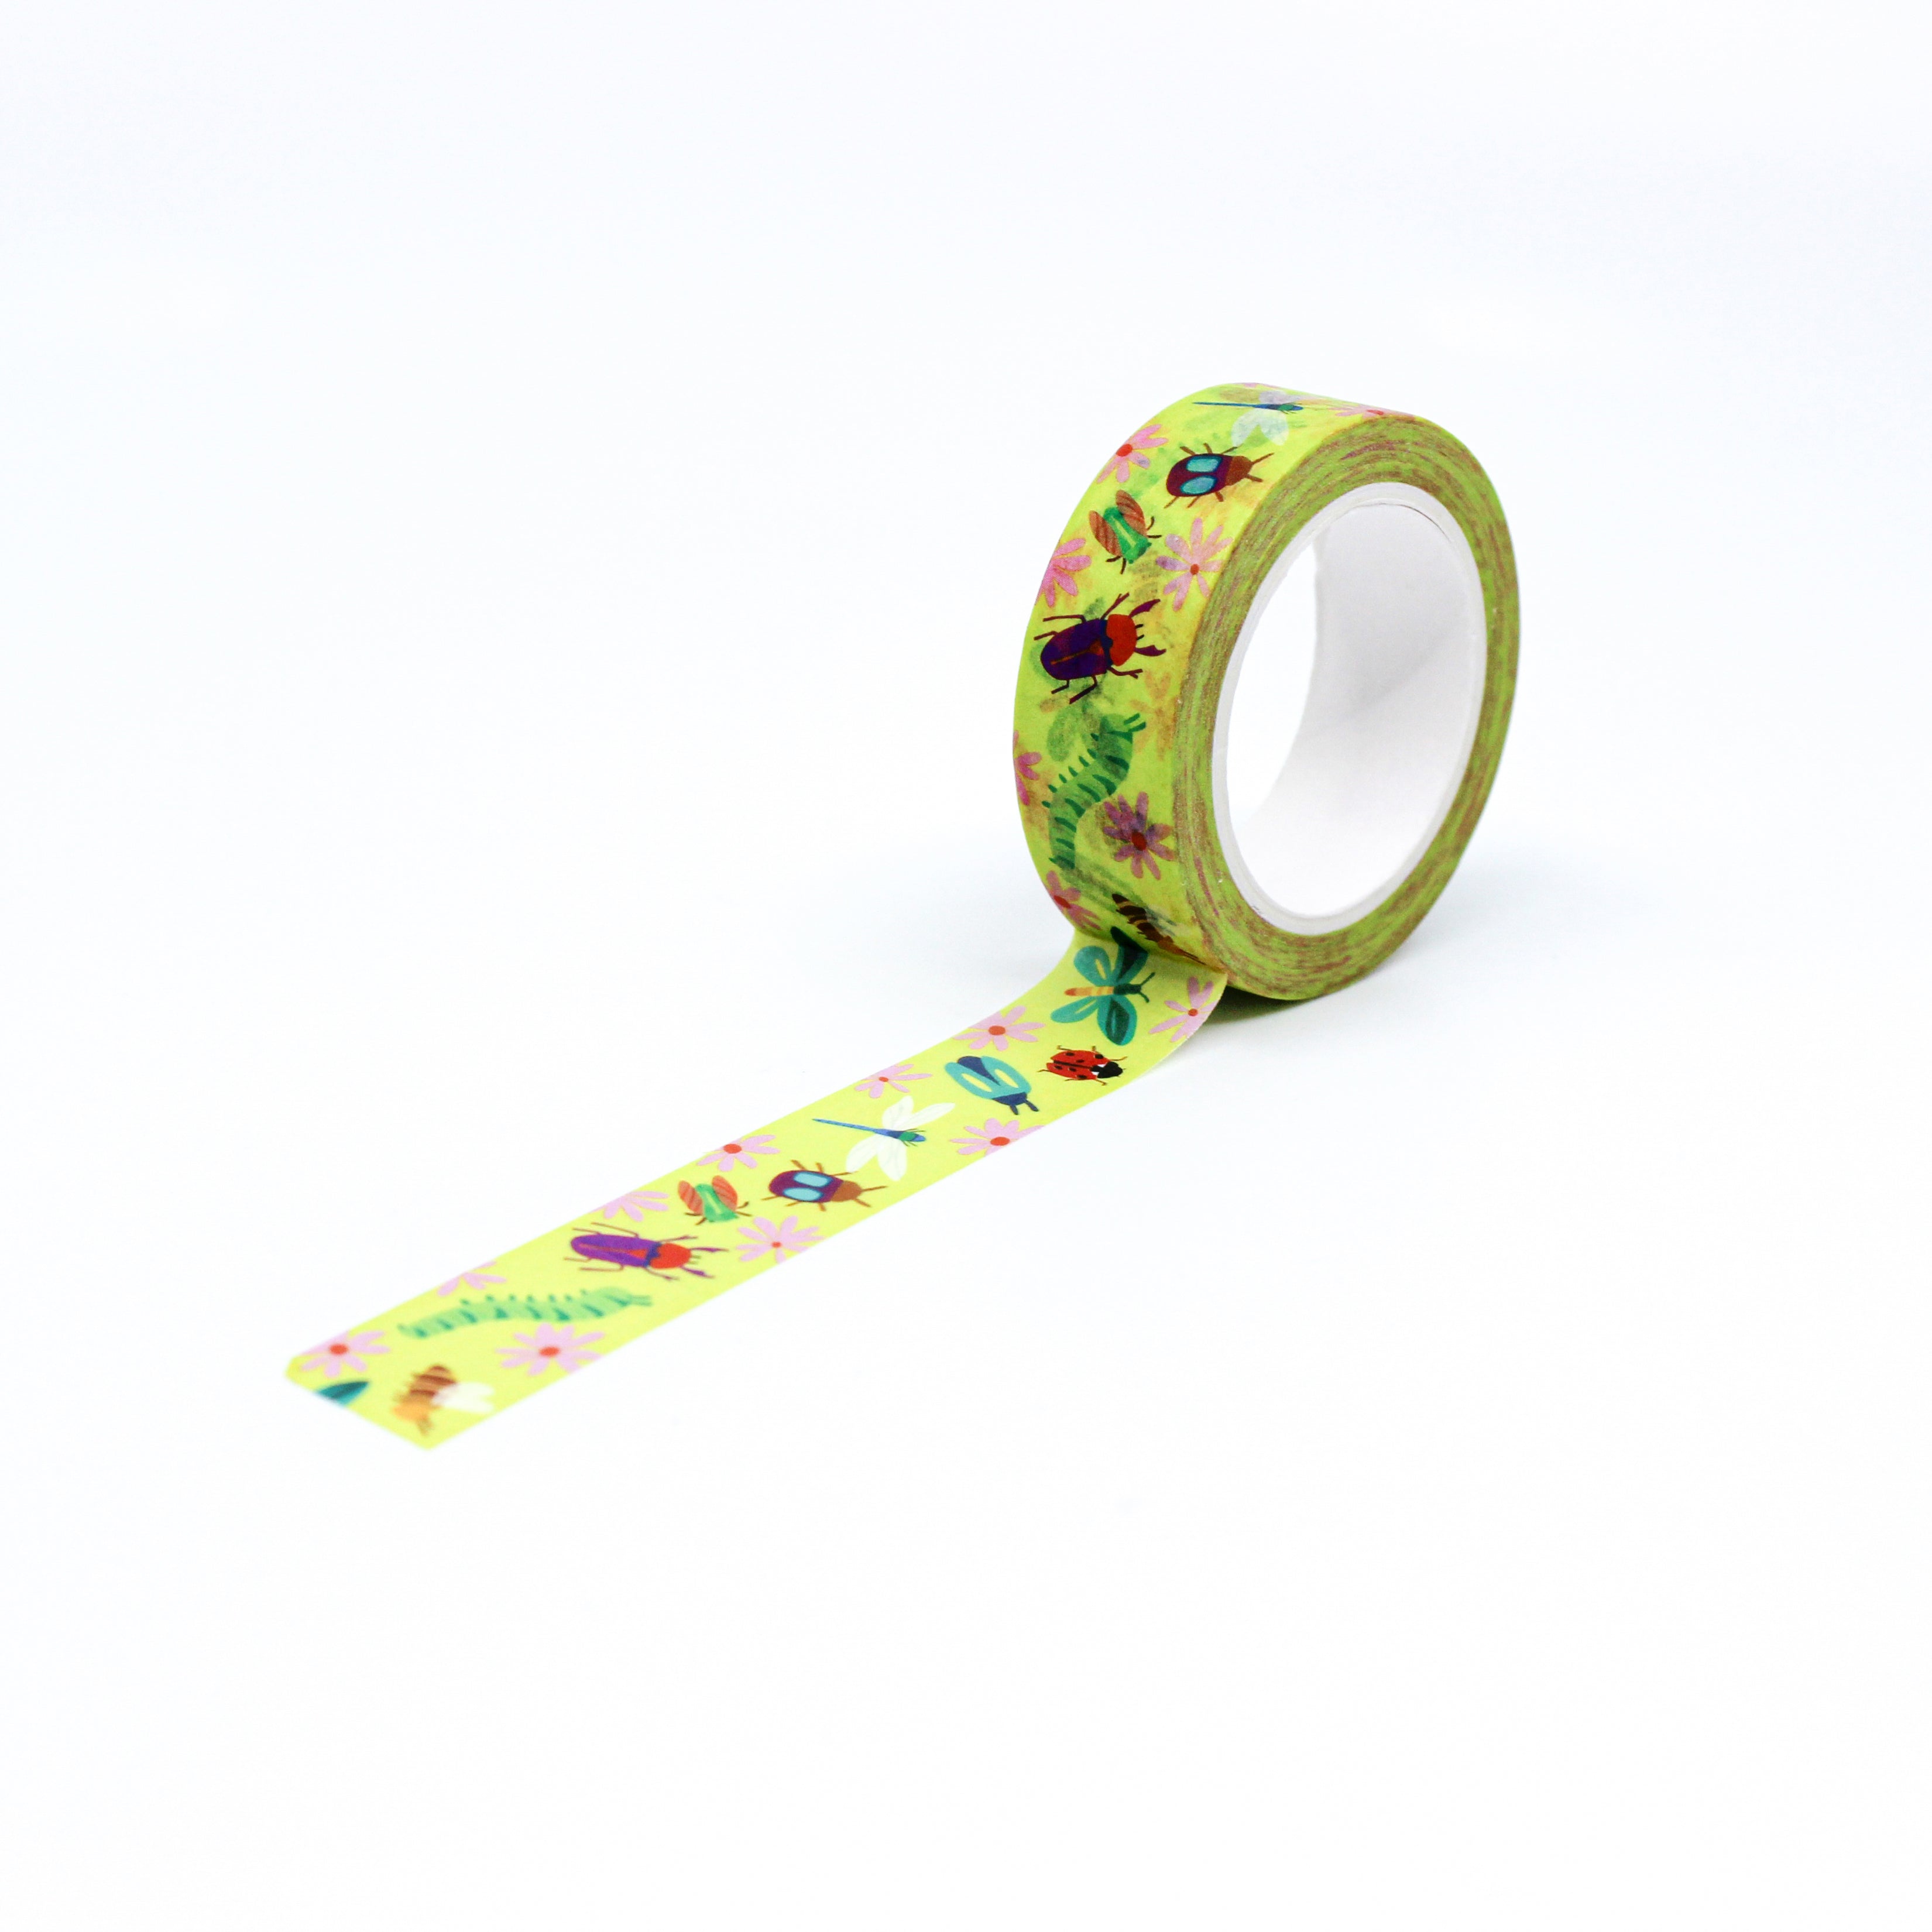 This is a full pattern repeat view of bright color insects themed washi tape that is perfect for a gardening or plant schedule Habit Tracker from BBB Supplies Craft Shop